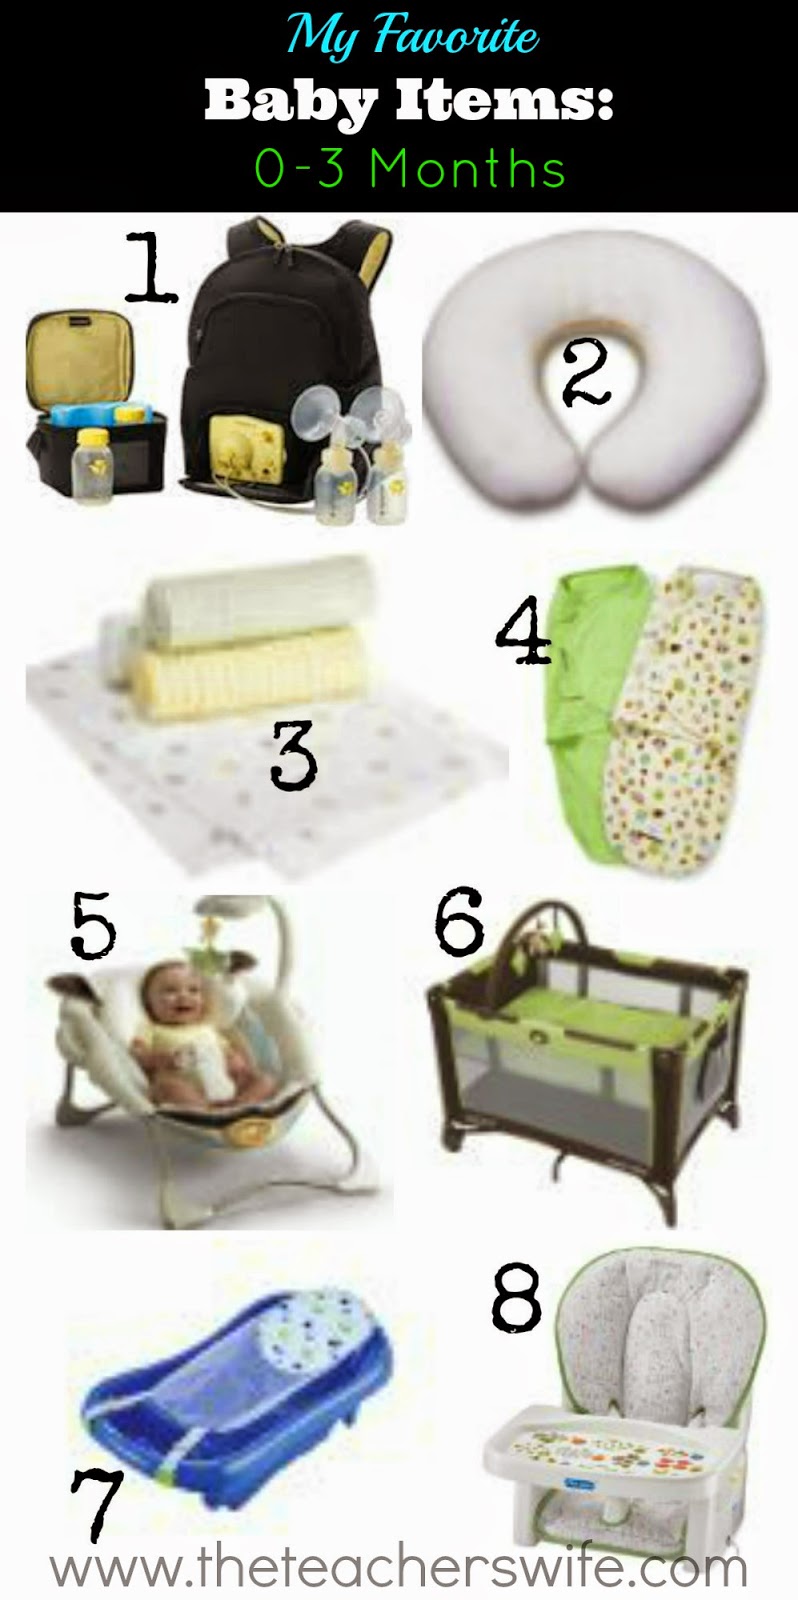 My Favorite Baby Items {0-3 Months} - The Teacher's Wife